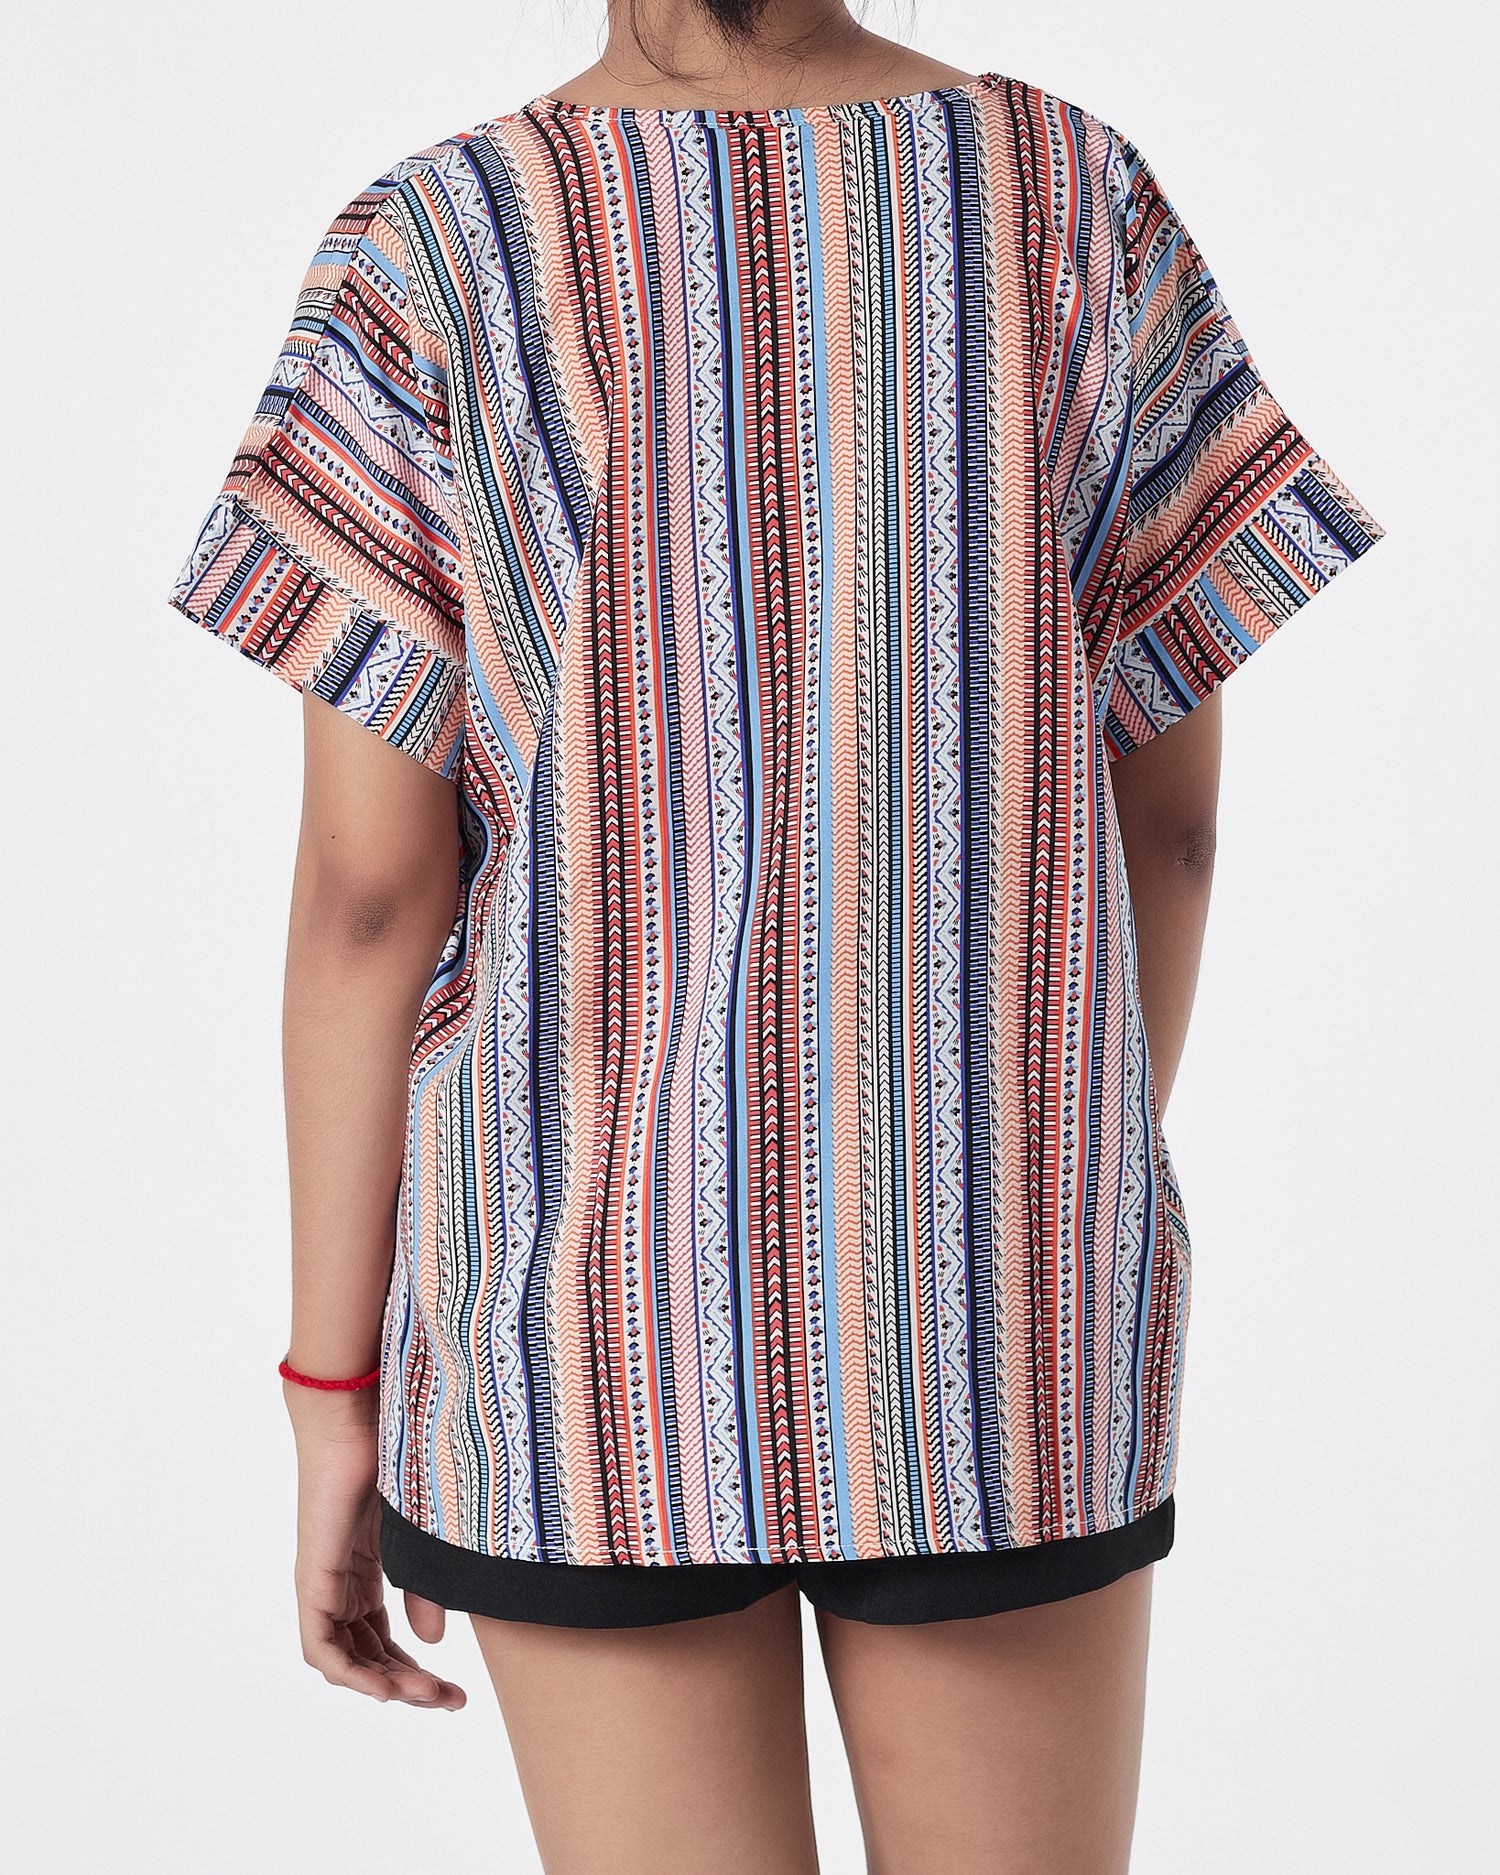 Striped Over Printed Lady Shirts Short Sleeve 12.90